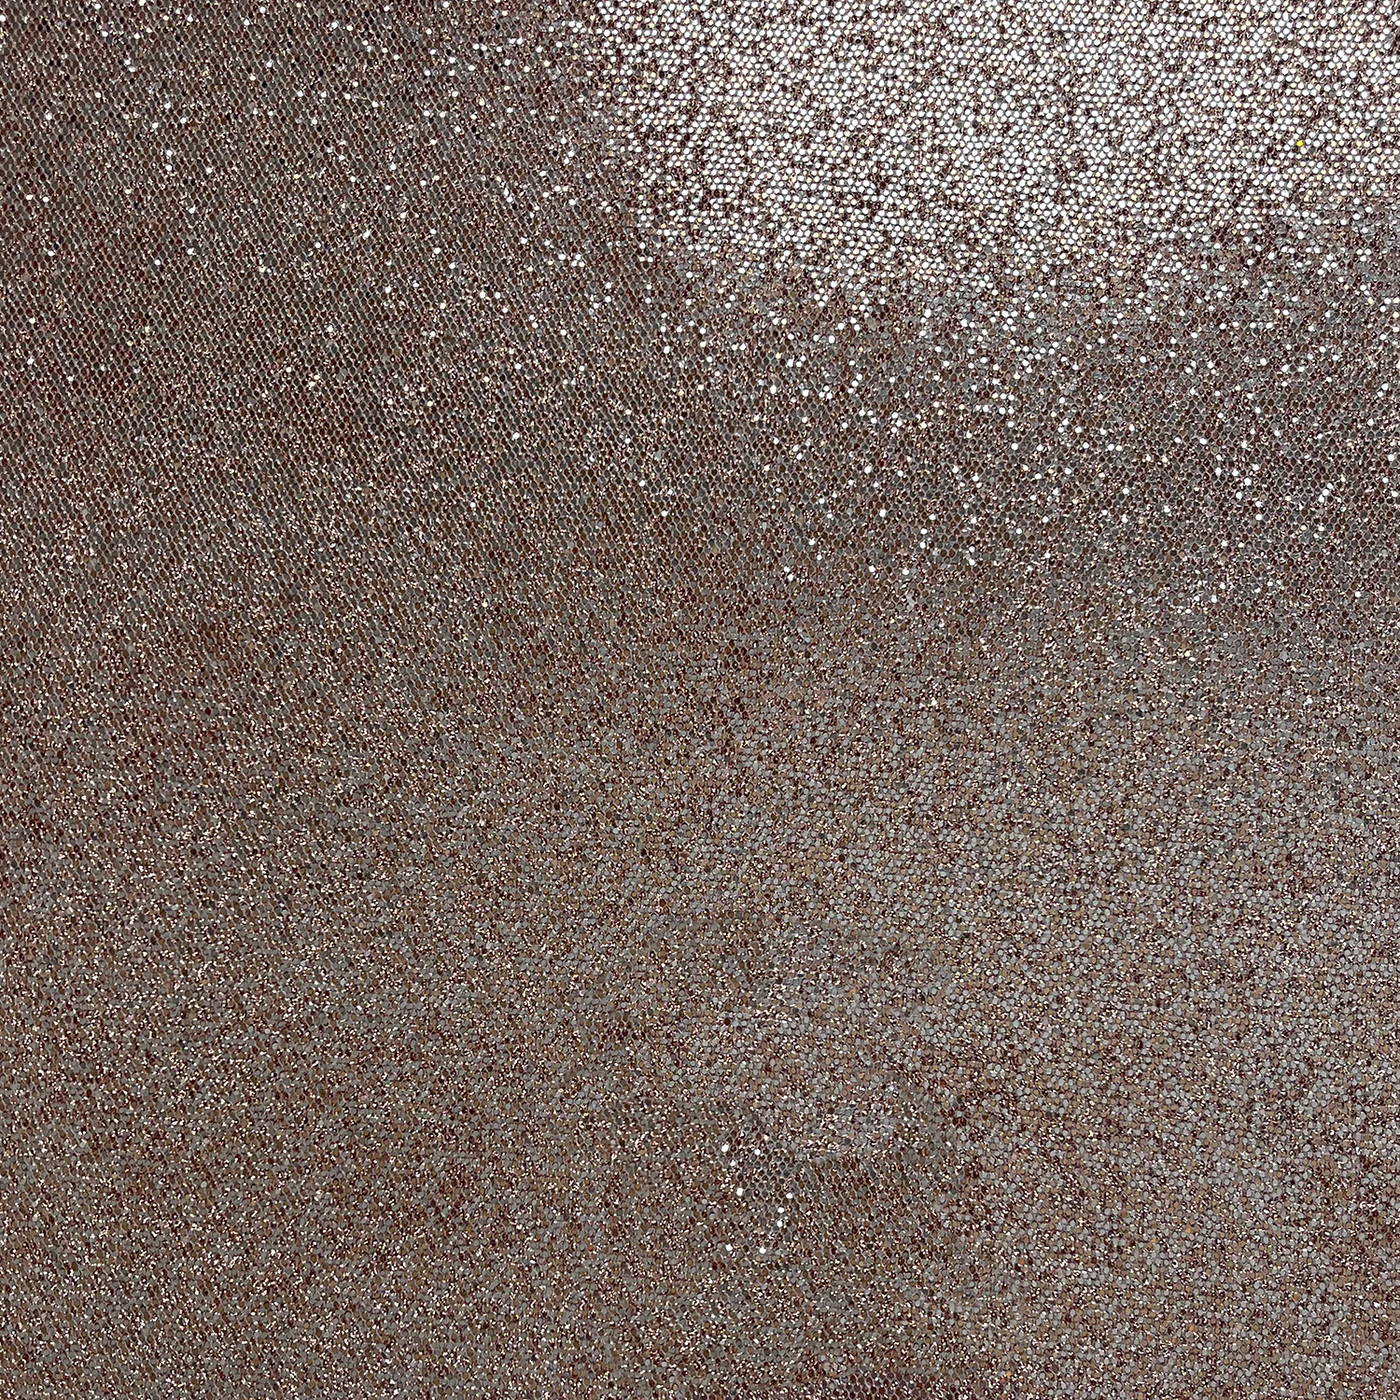 CHAMPAGNE FUSION Sequin Glitter Paper - Dusty pink chunky glitter